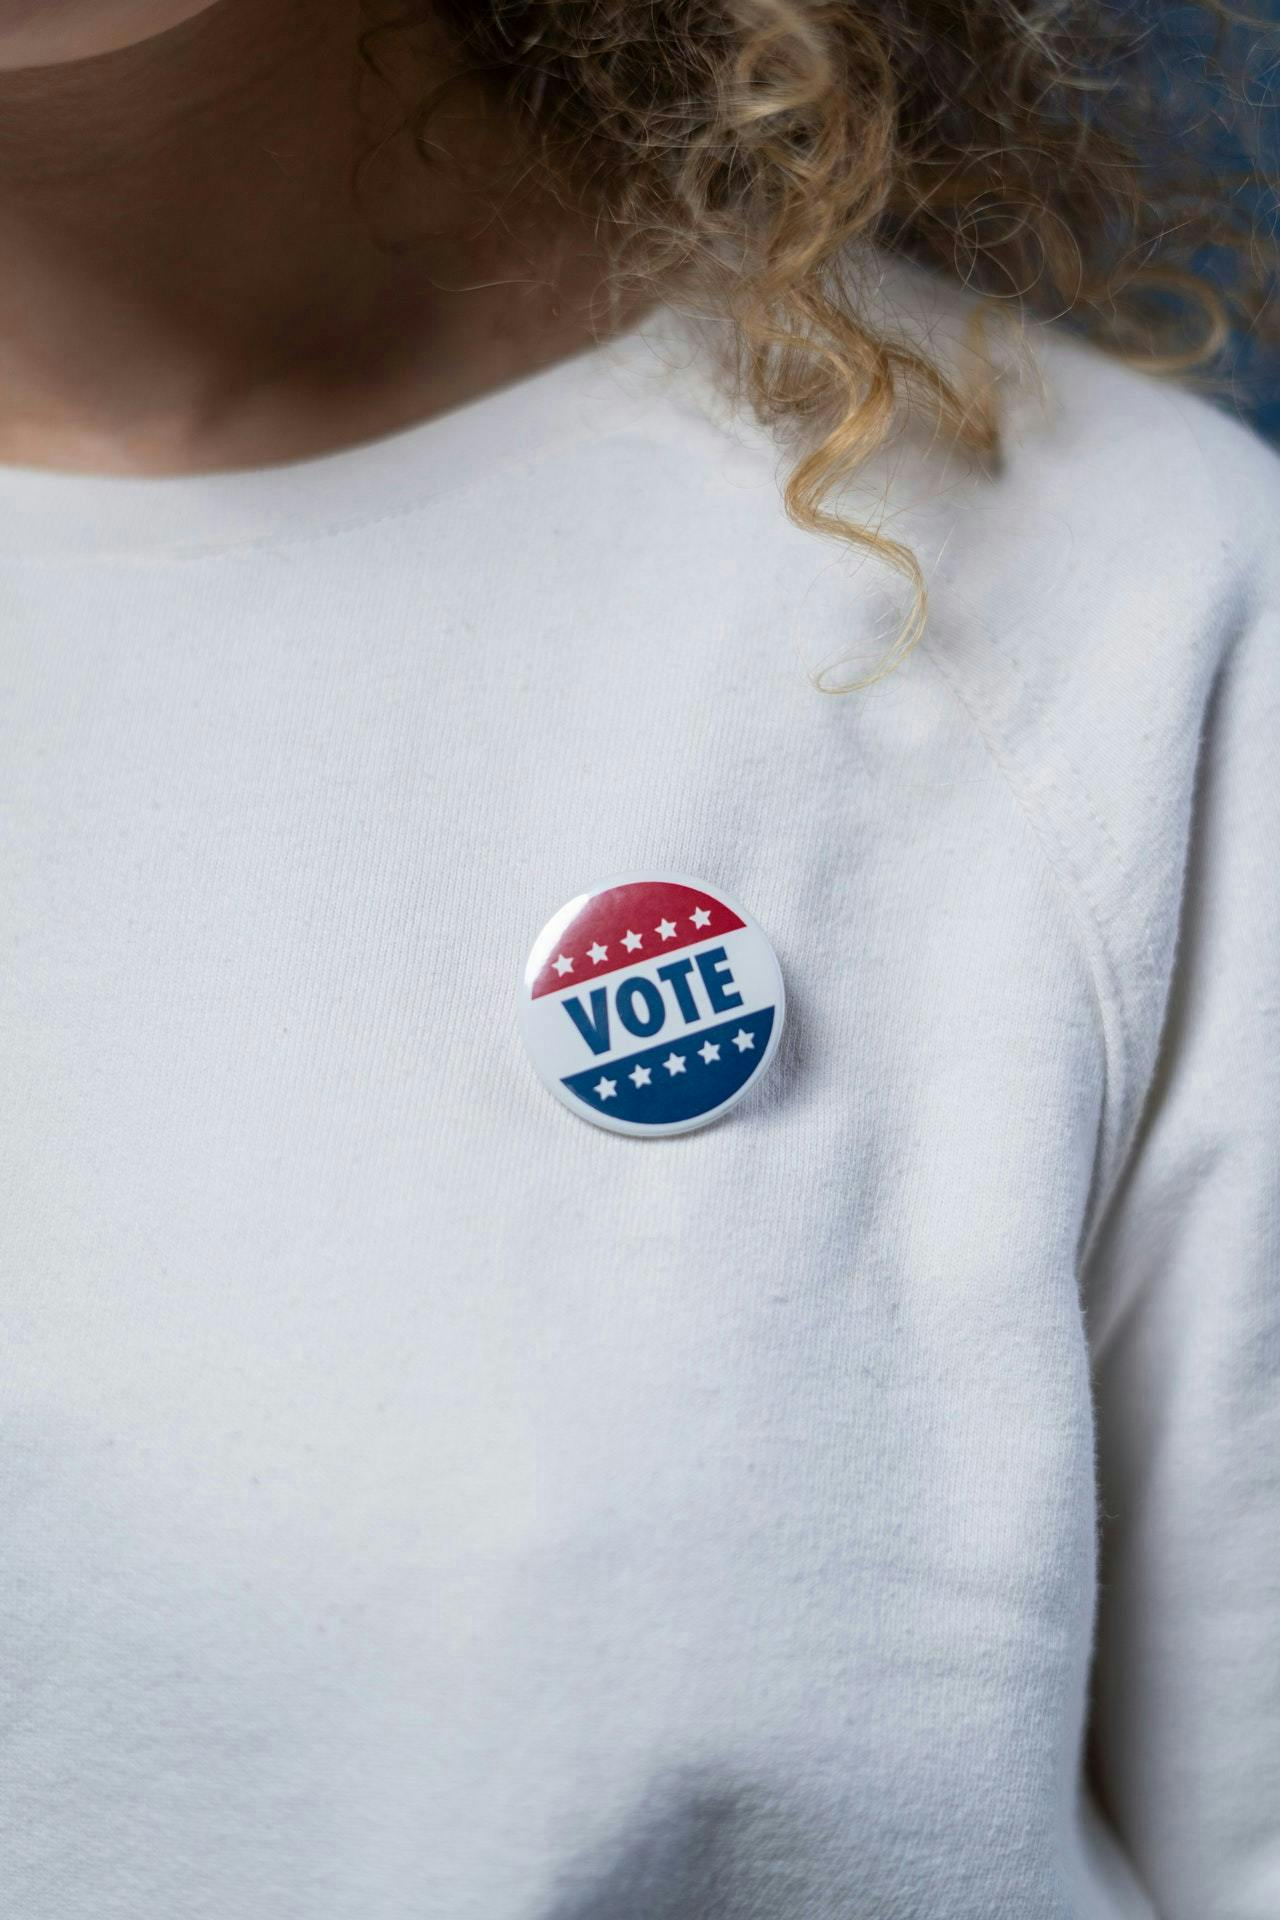 A person wearing a white shirt with a circular badge containing the word "VOTE" and stars in red, white, and blue.